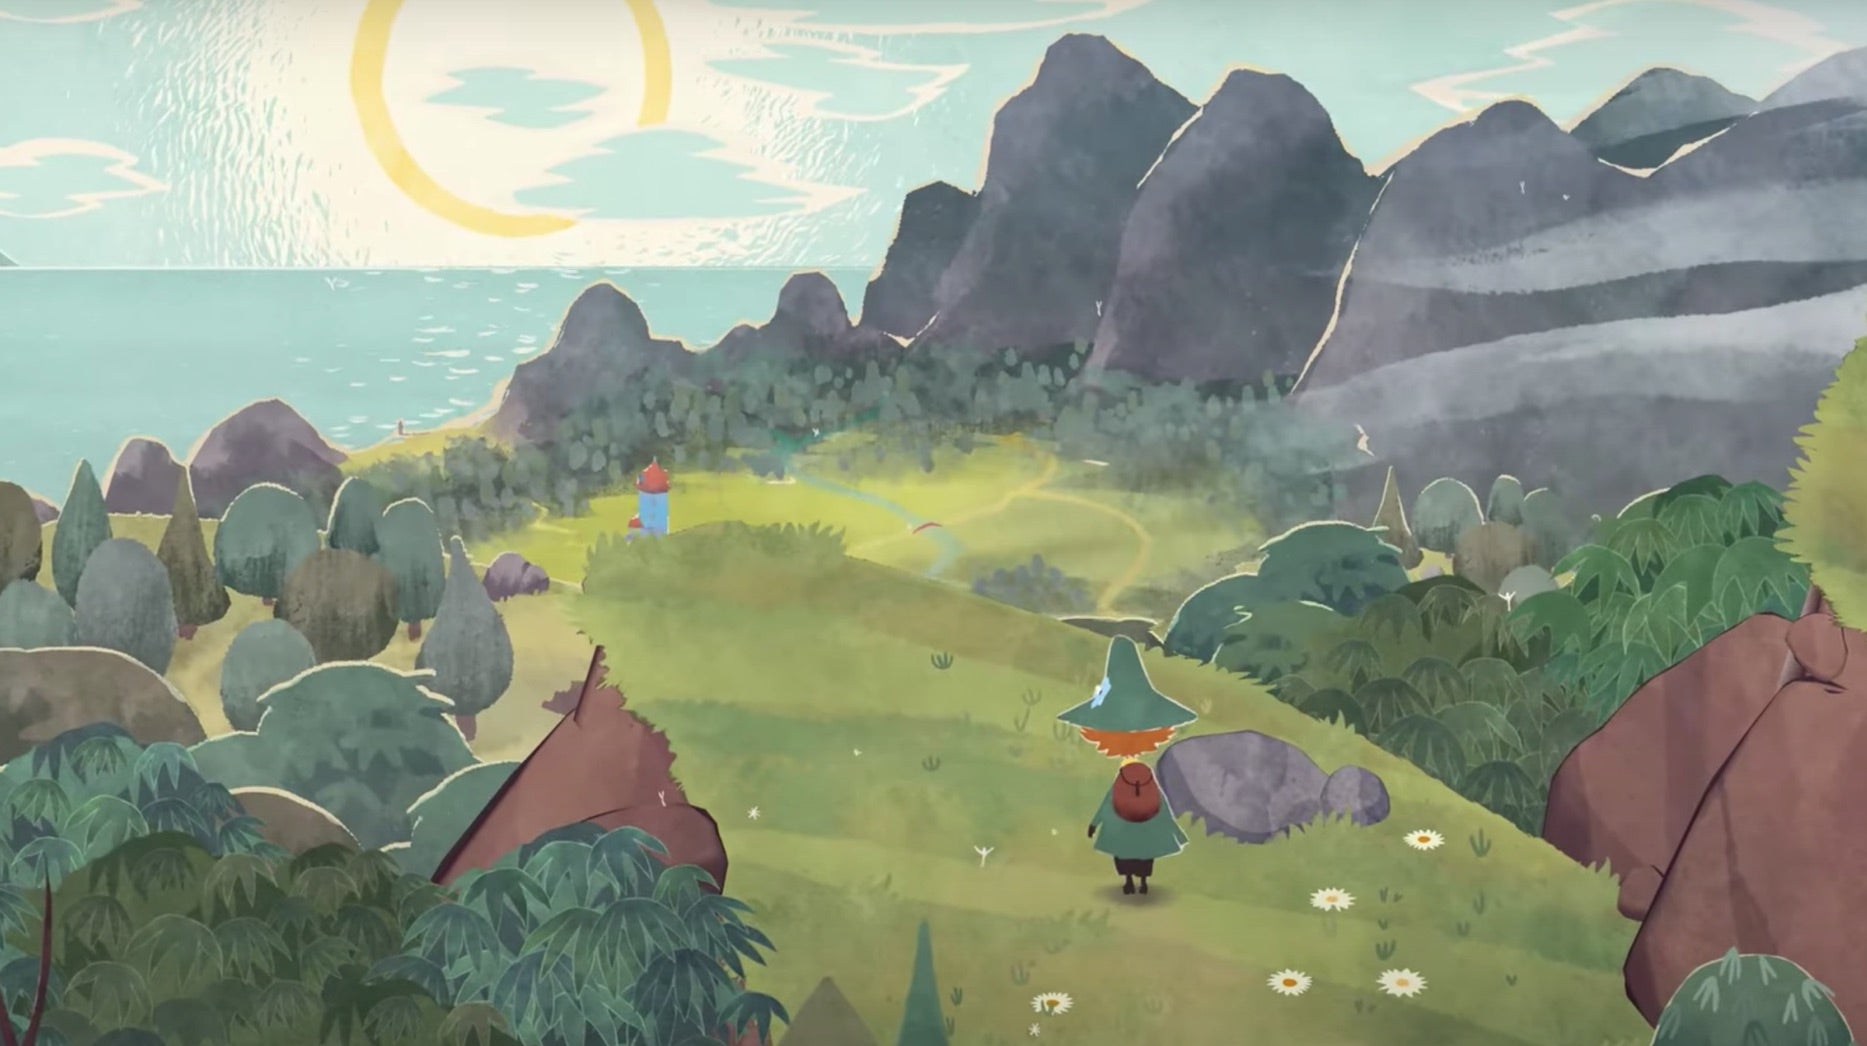 Image for Moomin musical adventure Snufkin: Melody of Moominvalley looks lovely in first trailer